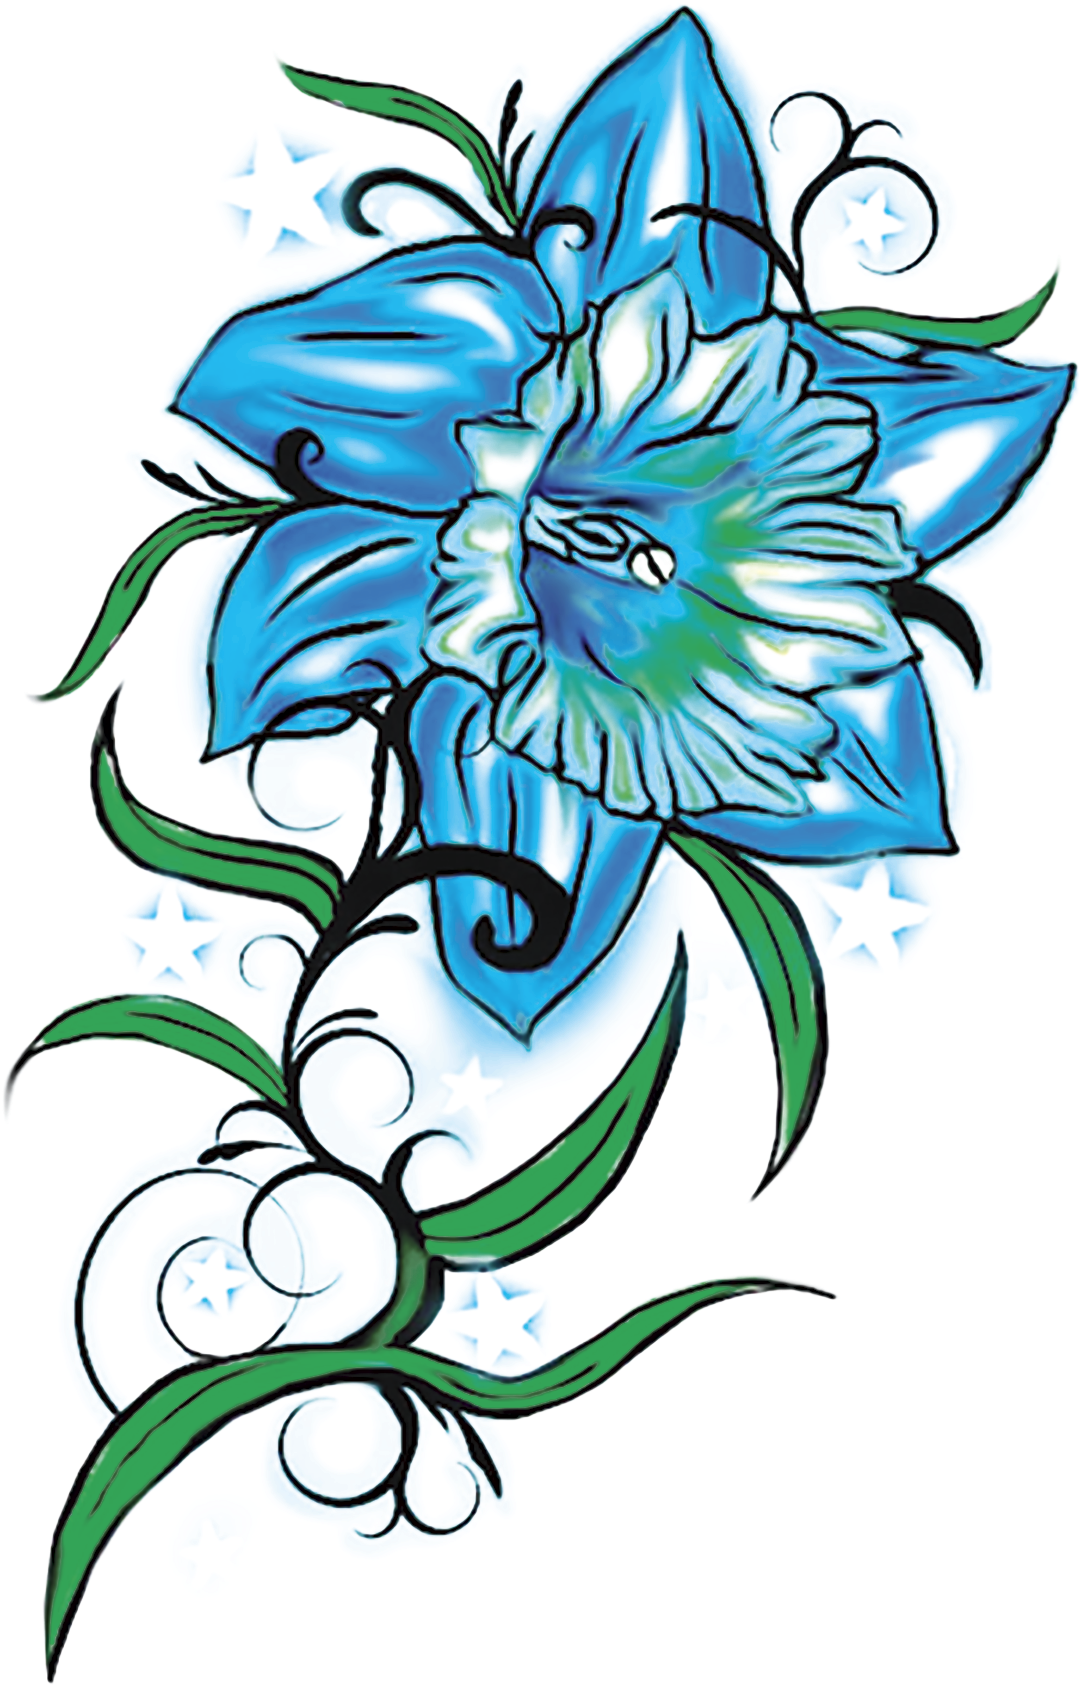 A Blue Flower With Green Leaves And Stars